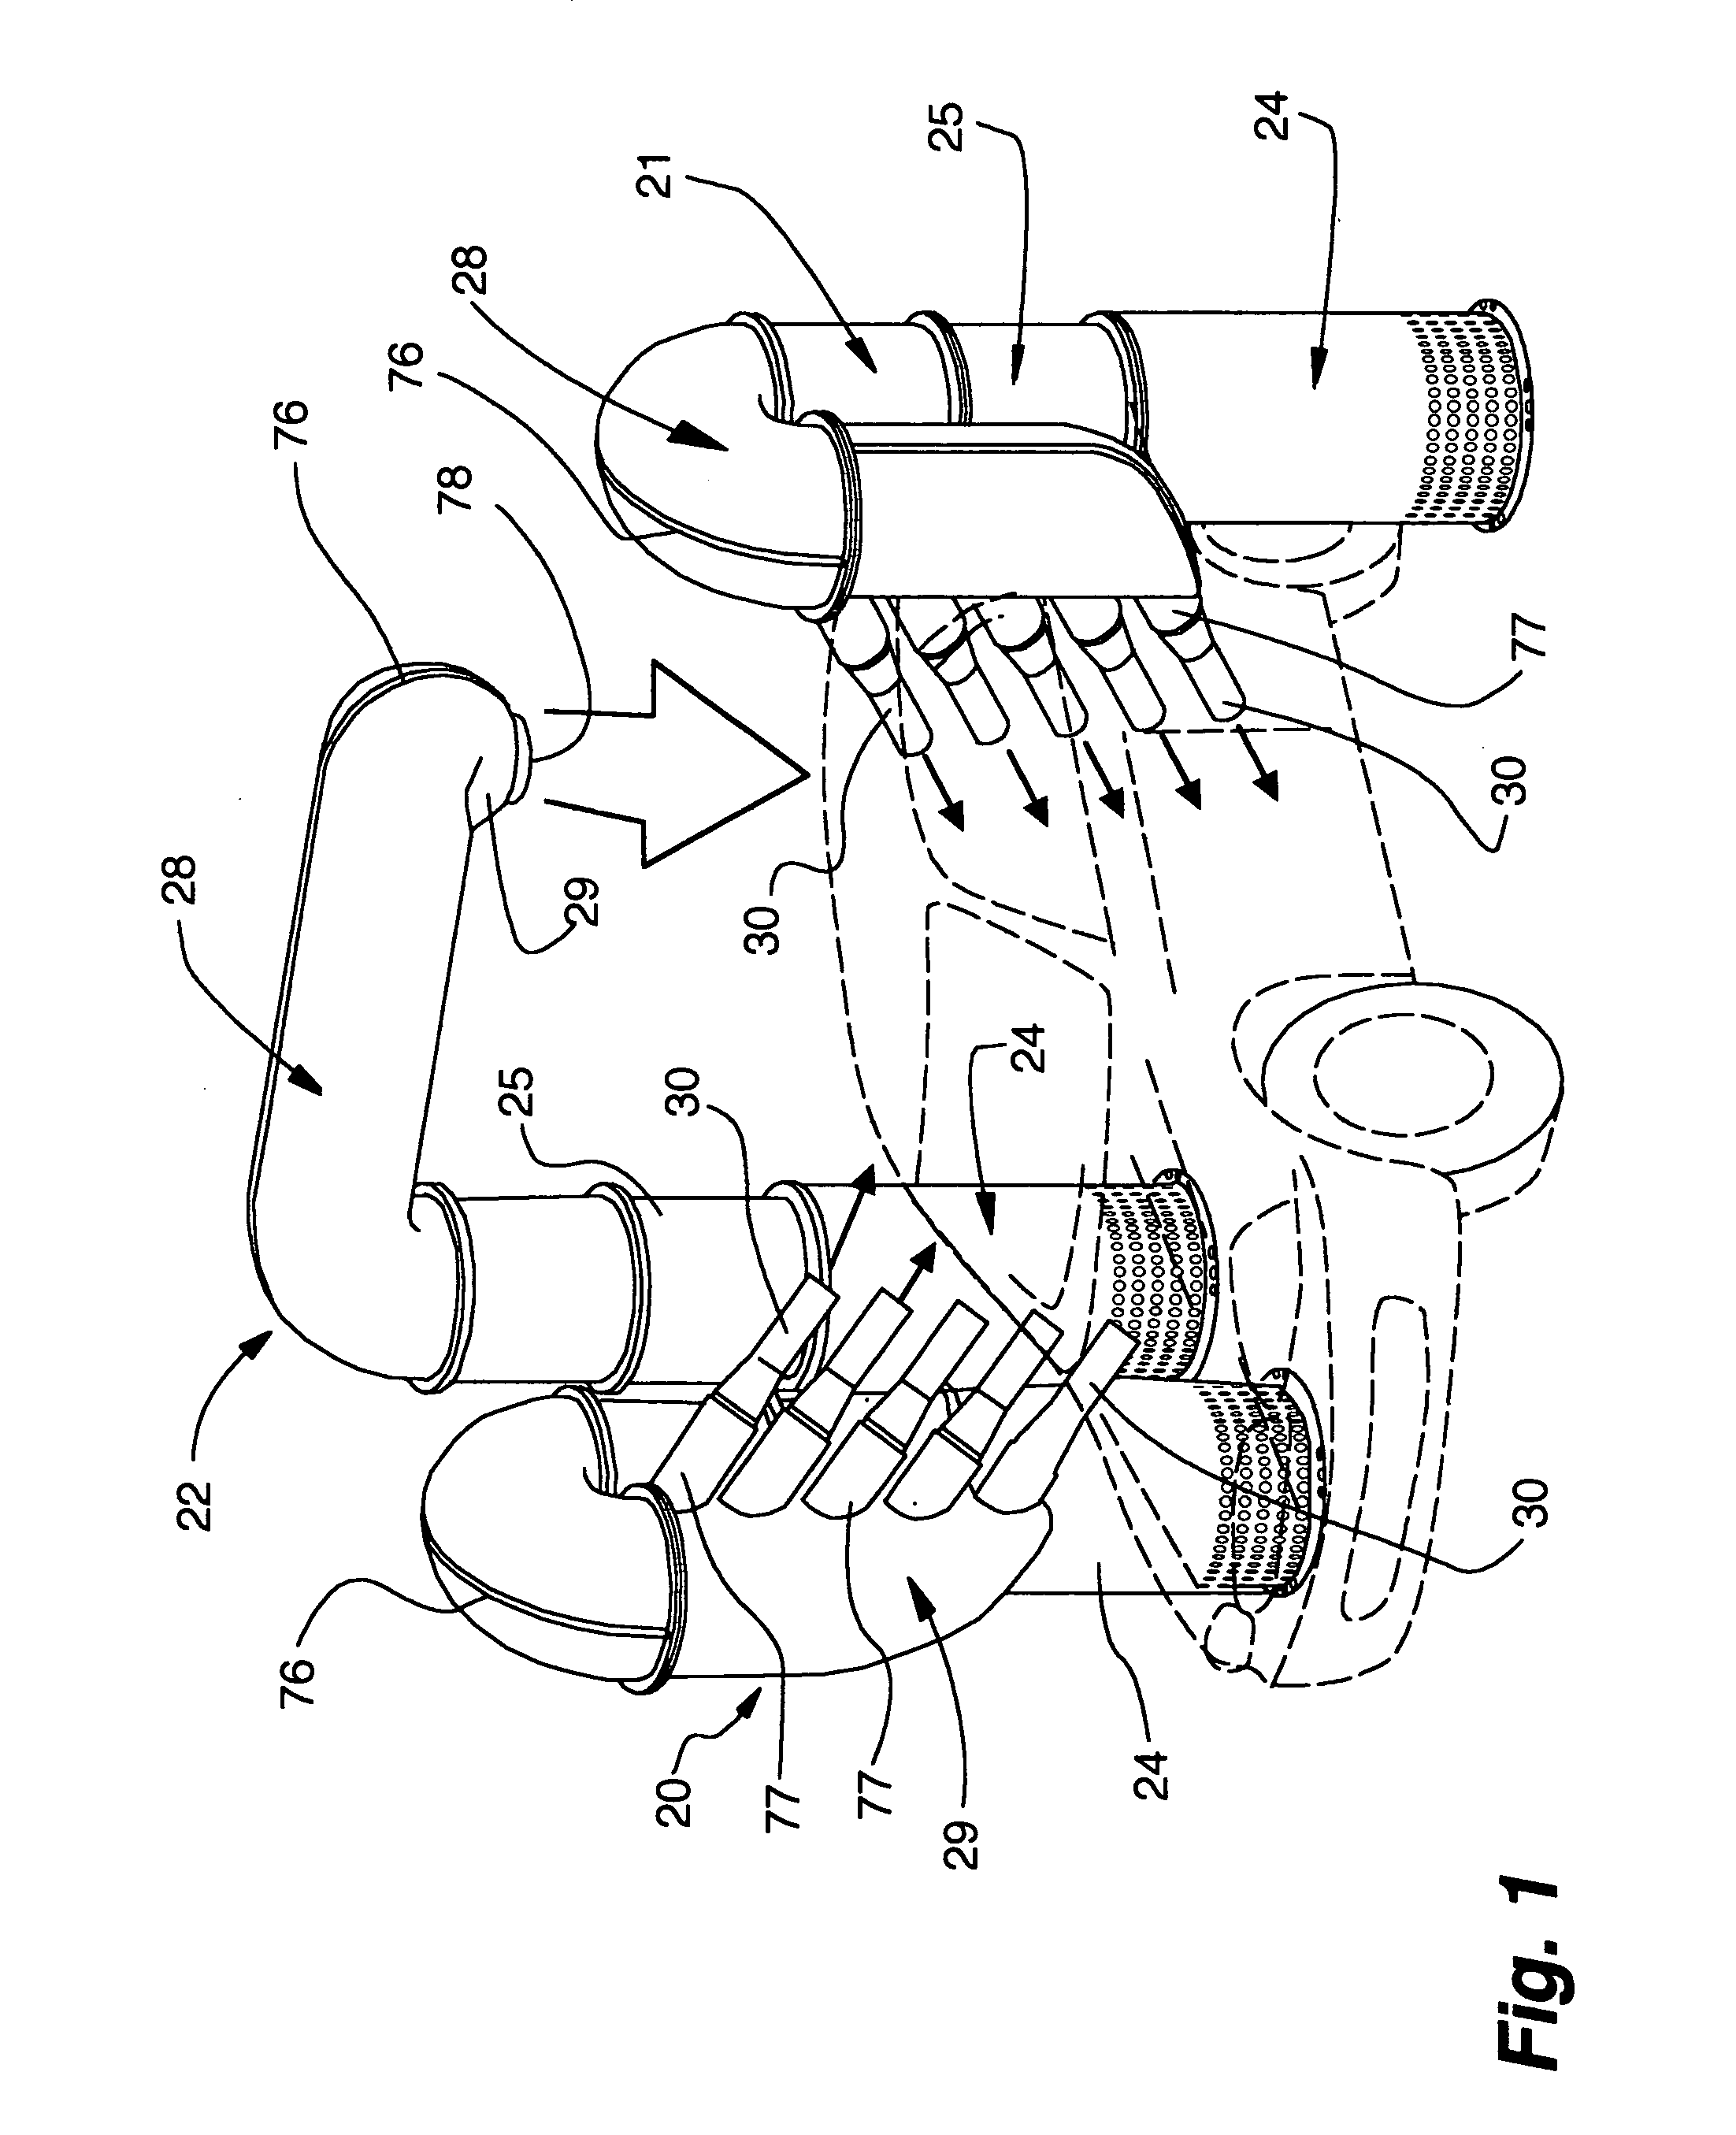 Noise attenuating drying apparatus for motor vehicles